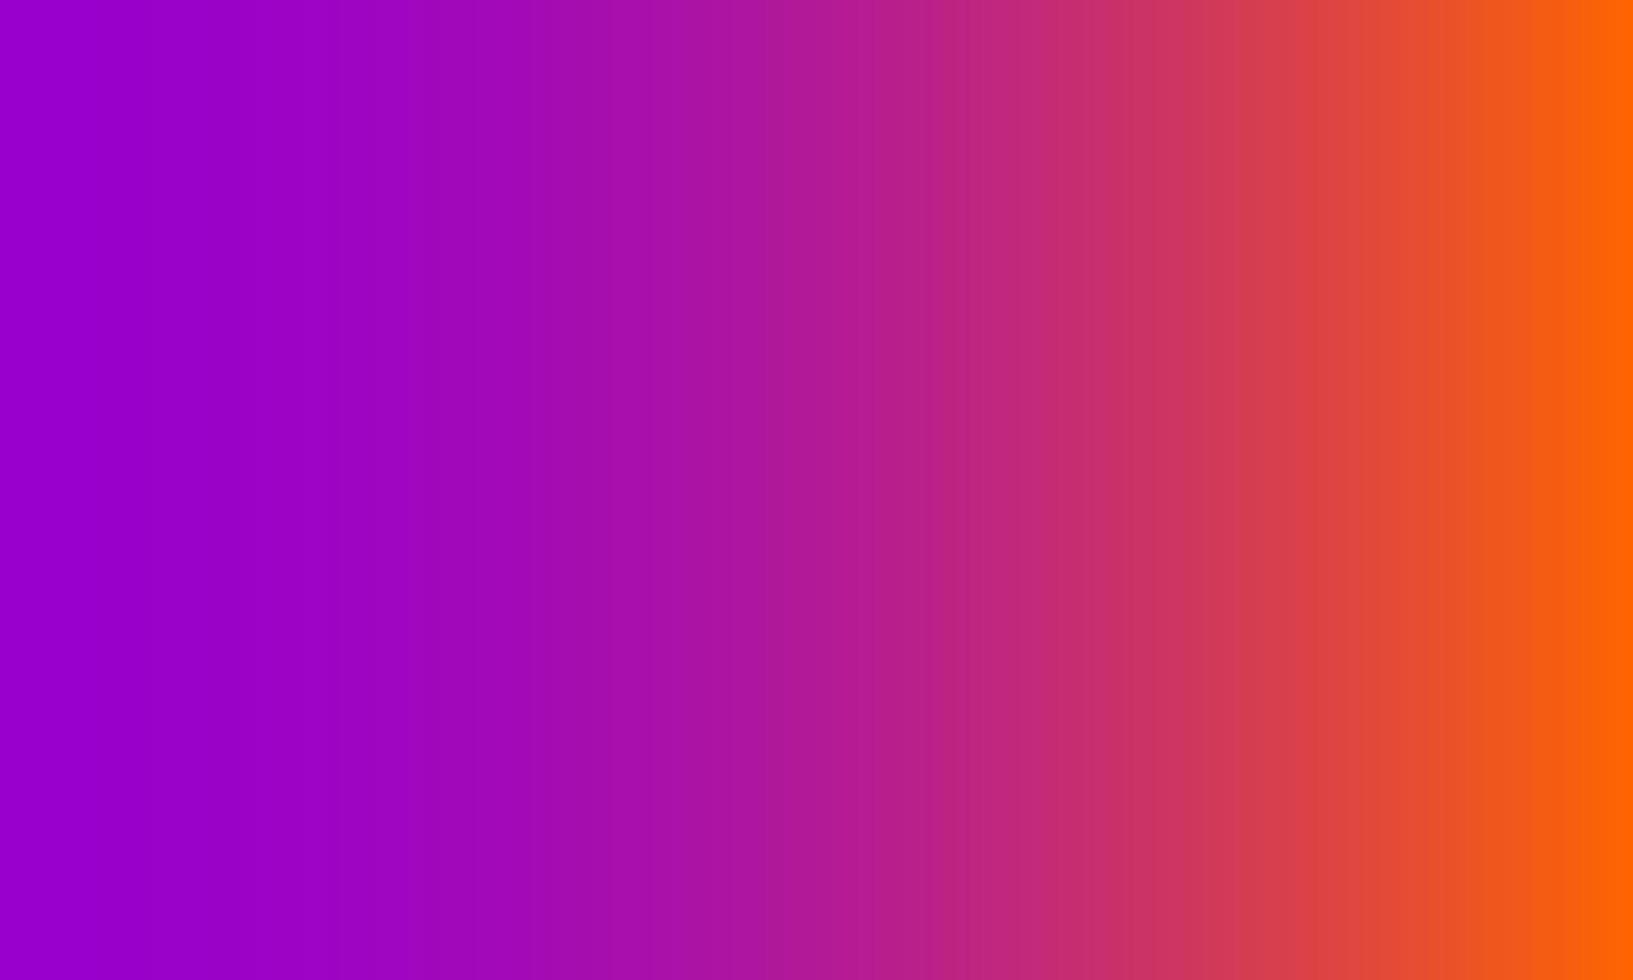 gradient background. purple and soft orange. abstract, simple, cheerful and clean style. suitable for copy space, wallpaper, background, banner, flyer or decor vector